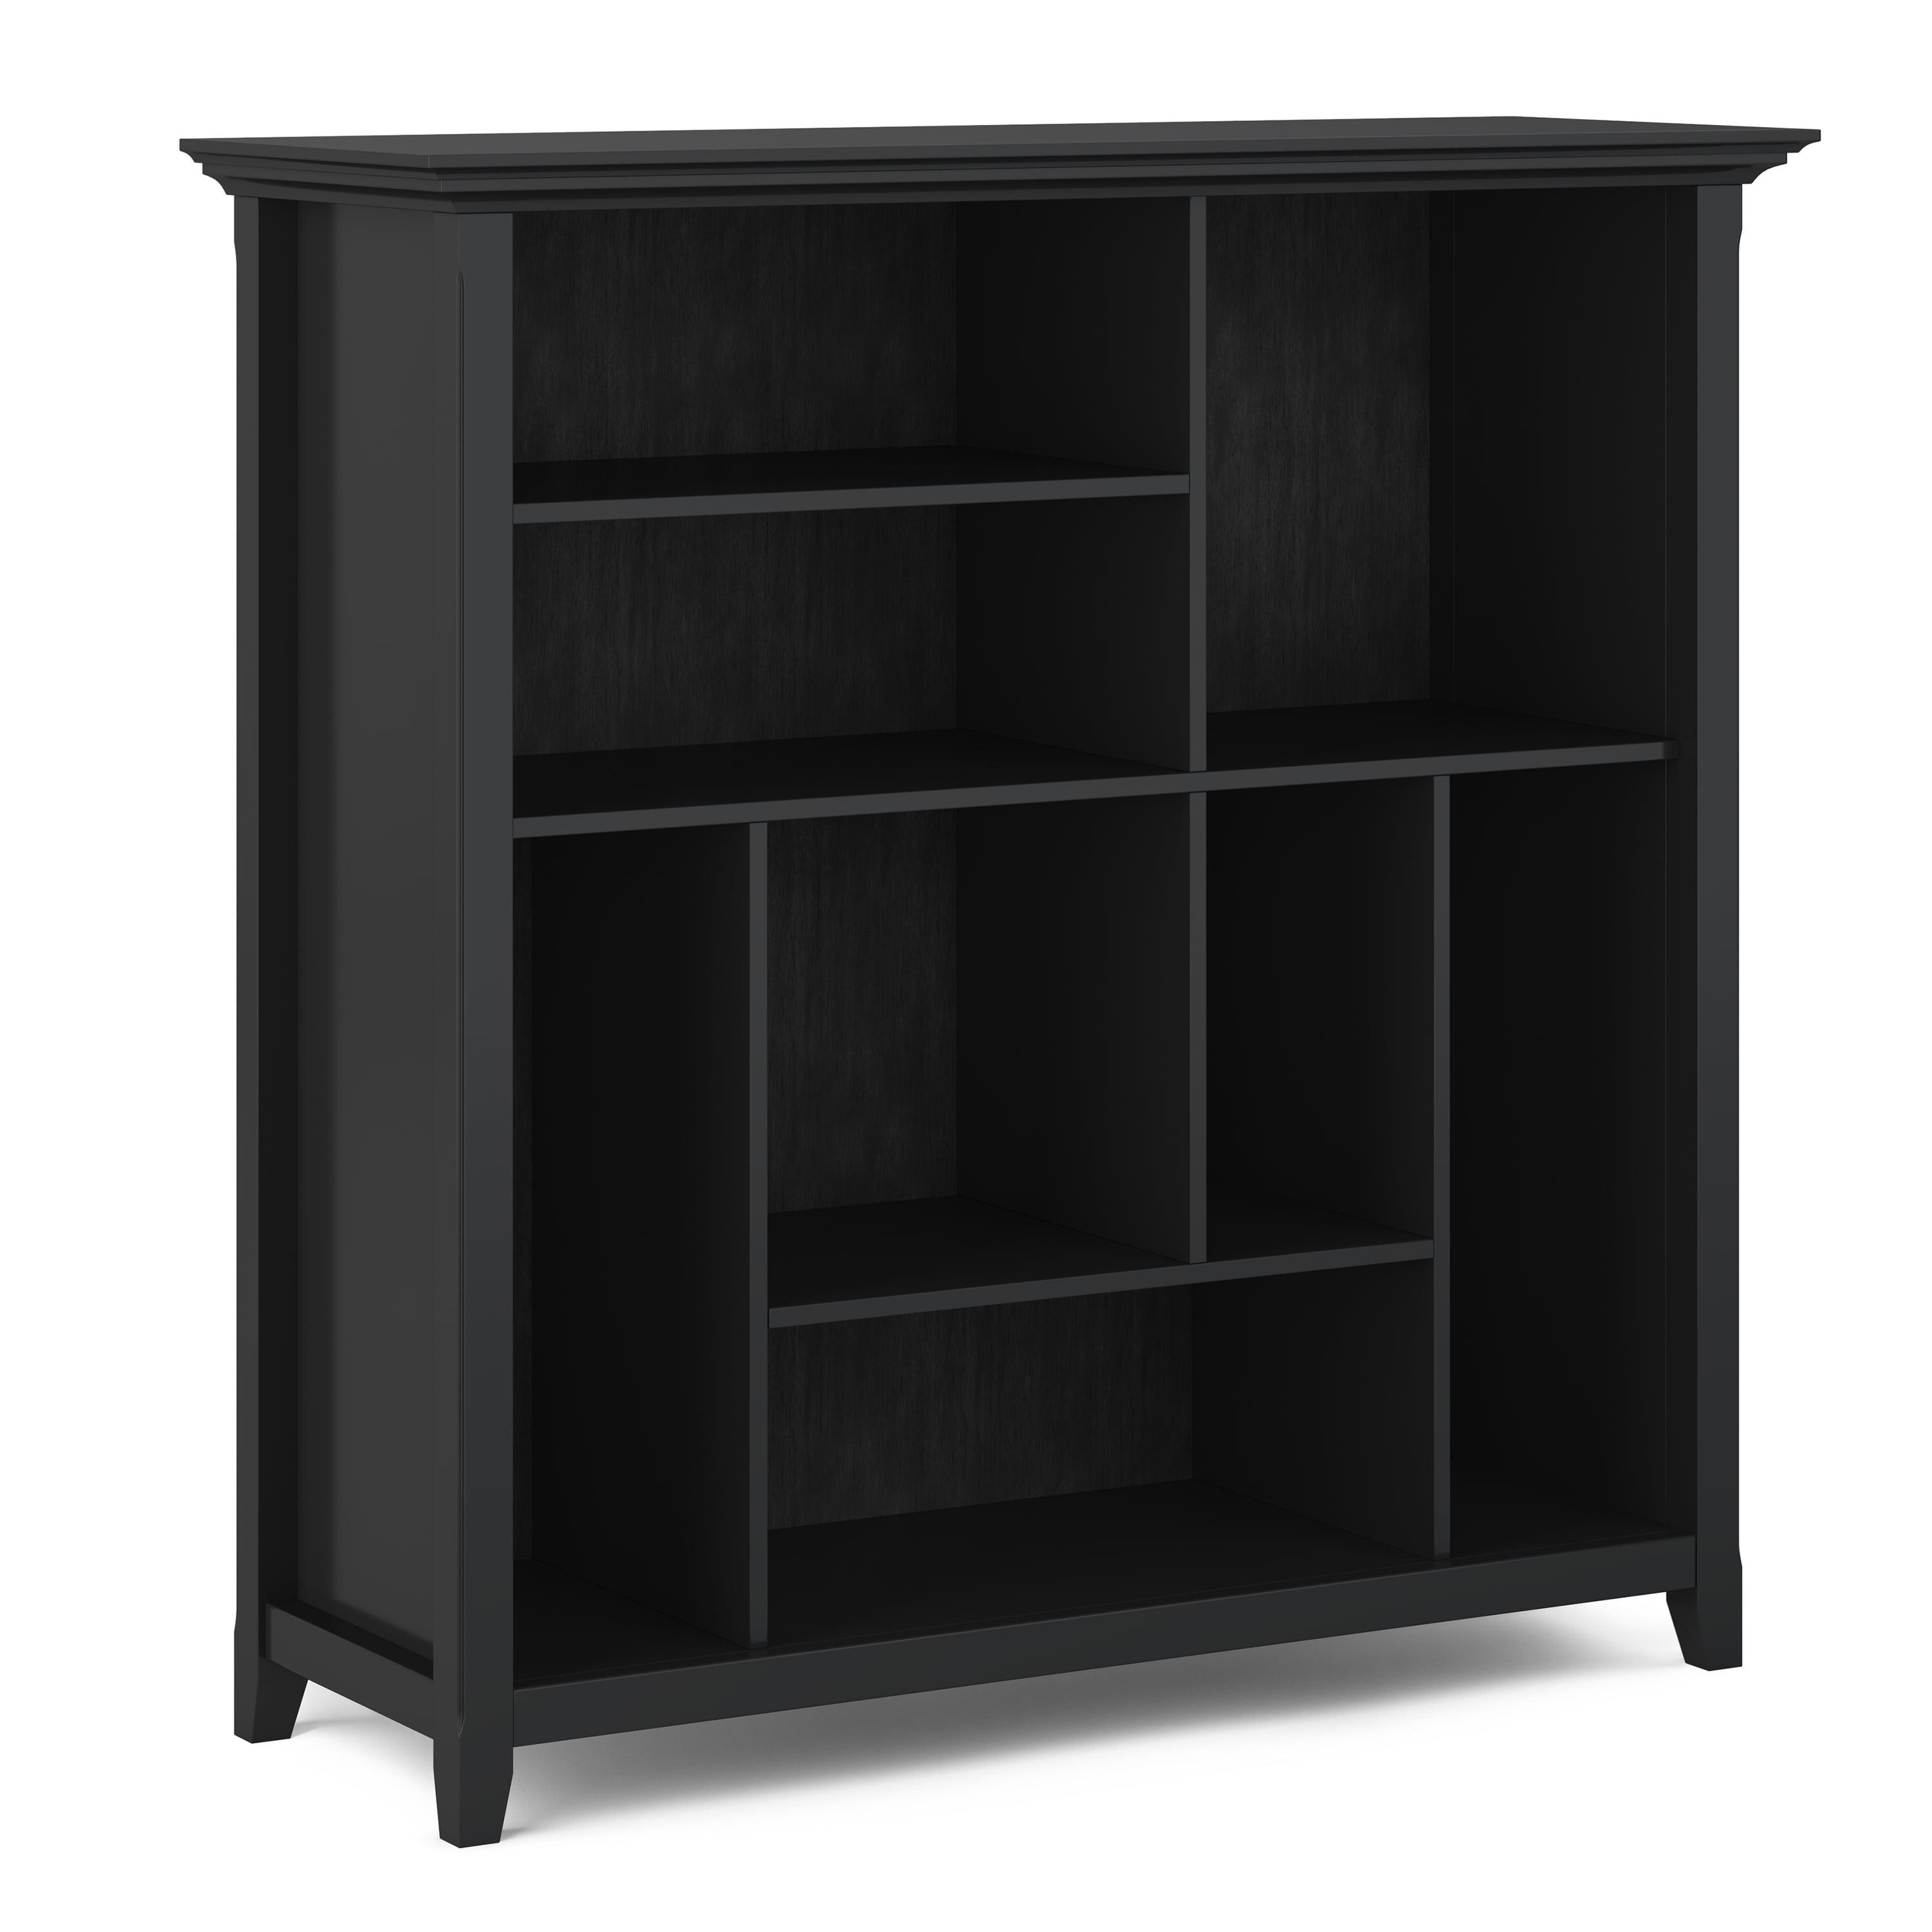 Amherst Handcrafted Solid Wood 44" Multi-Cube Storage Unit in Black